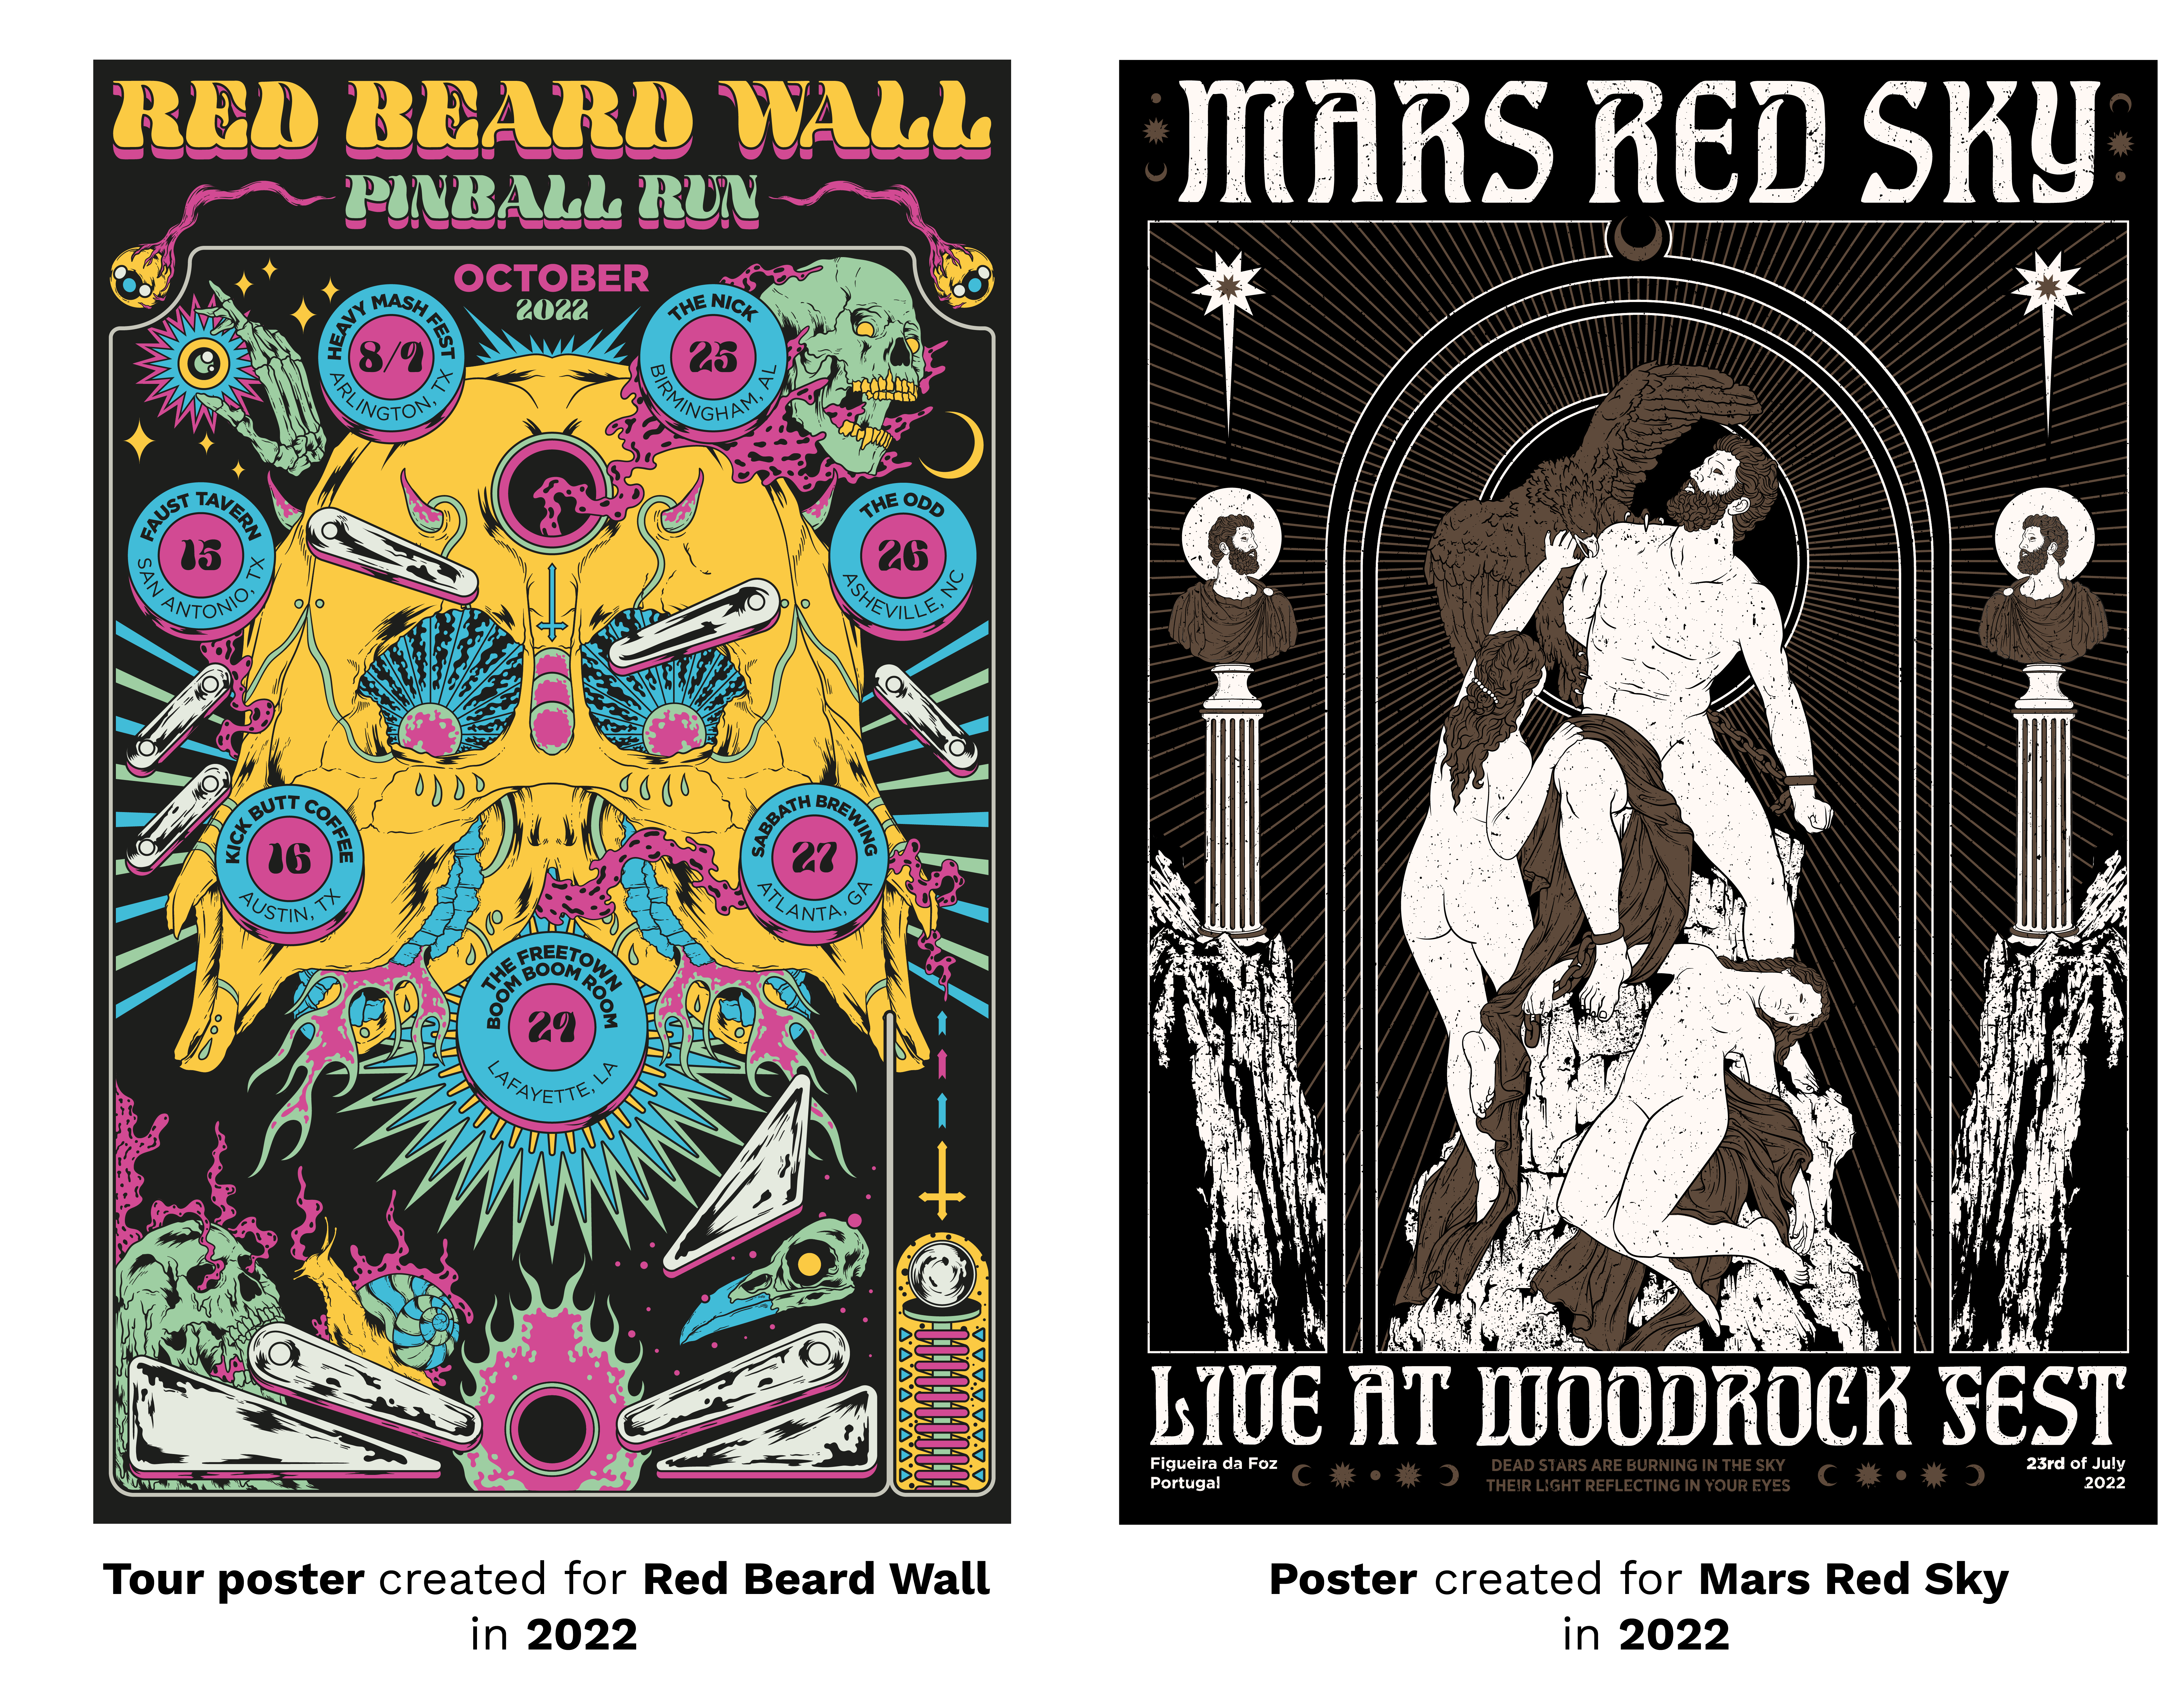 digital art to red beard wall with a pinball concept and poster to mars red sky concert at woodrock